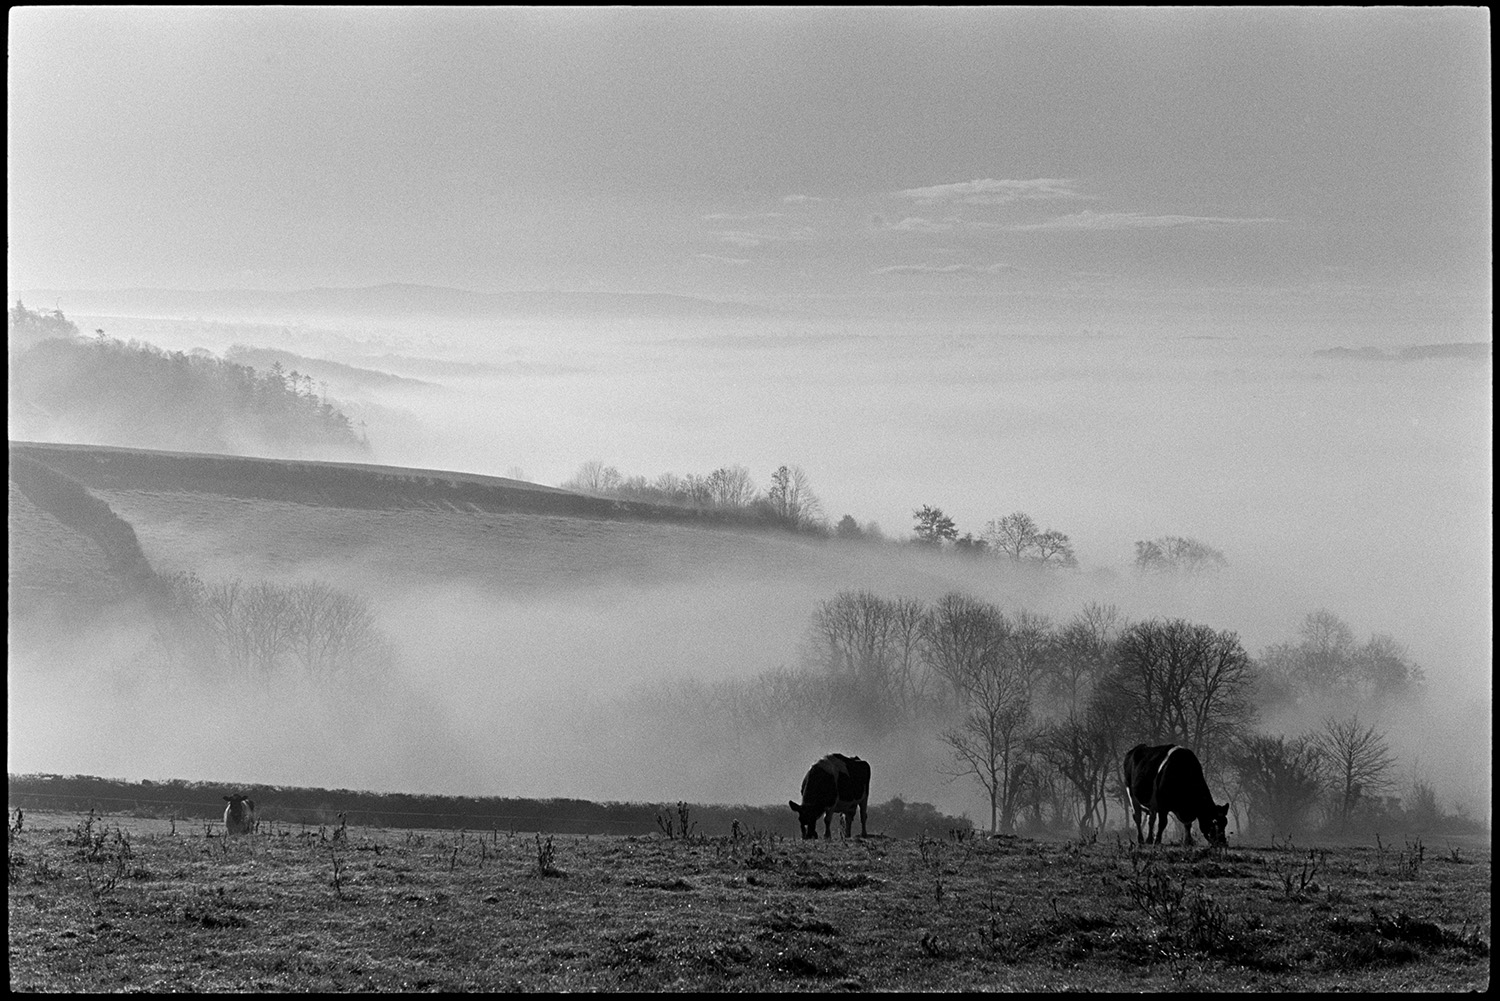 Landscape morning mist, cows and misty woods. 
[Cows grazing in a field at Harepath, Beaford in the morning. A misty landscape with trees and fields can be seen in the background.]